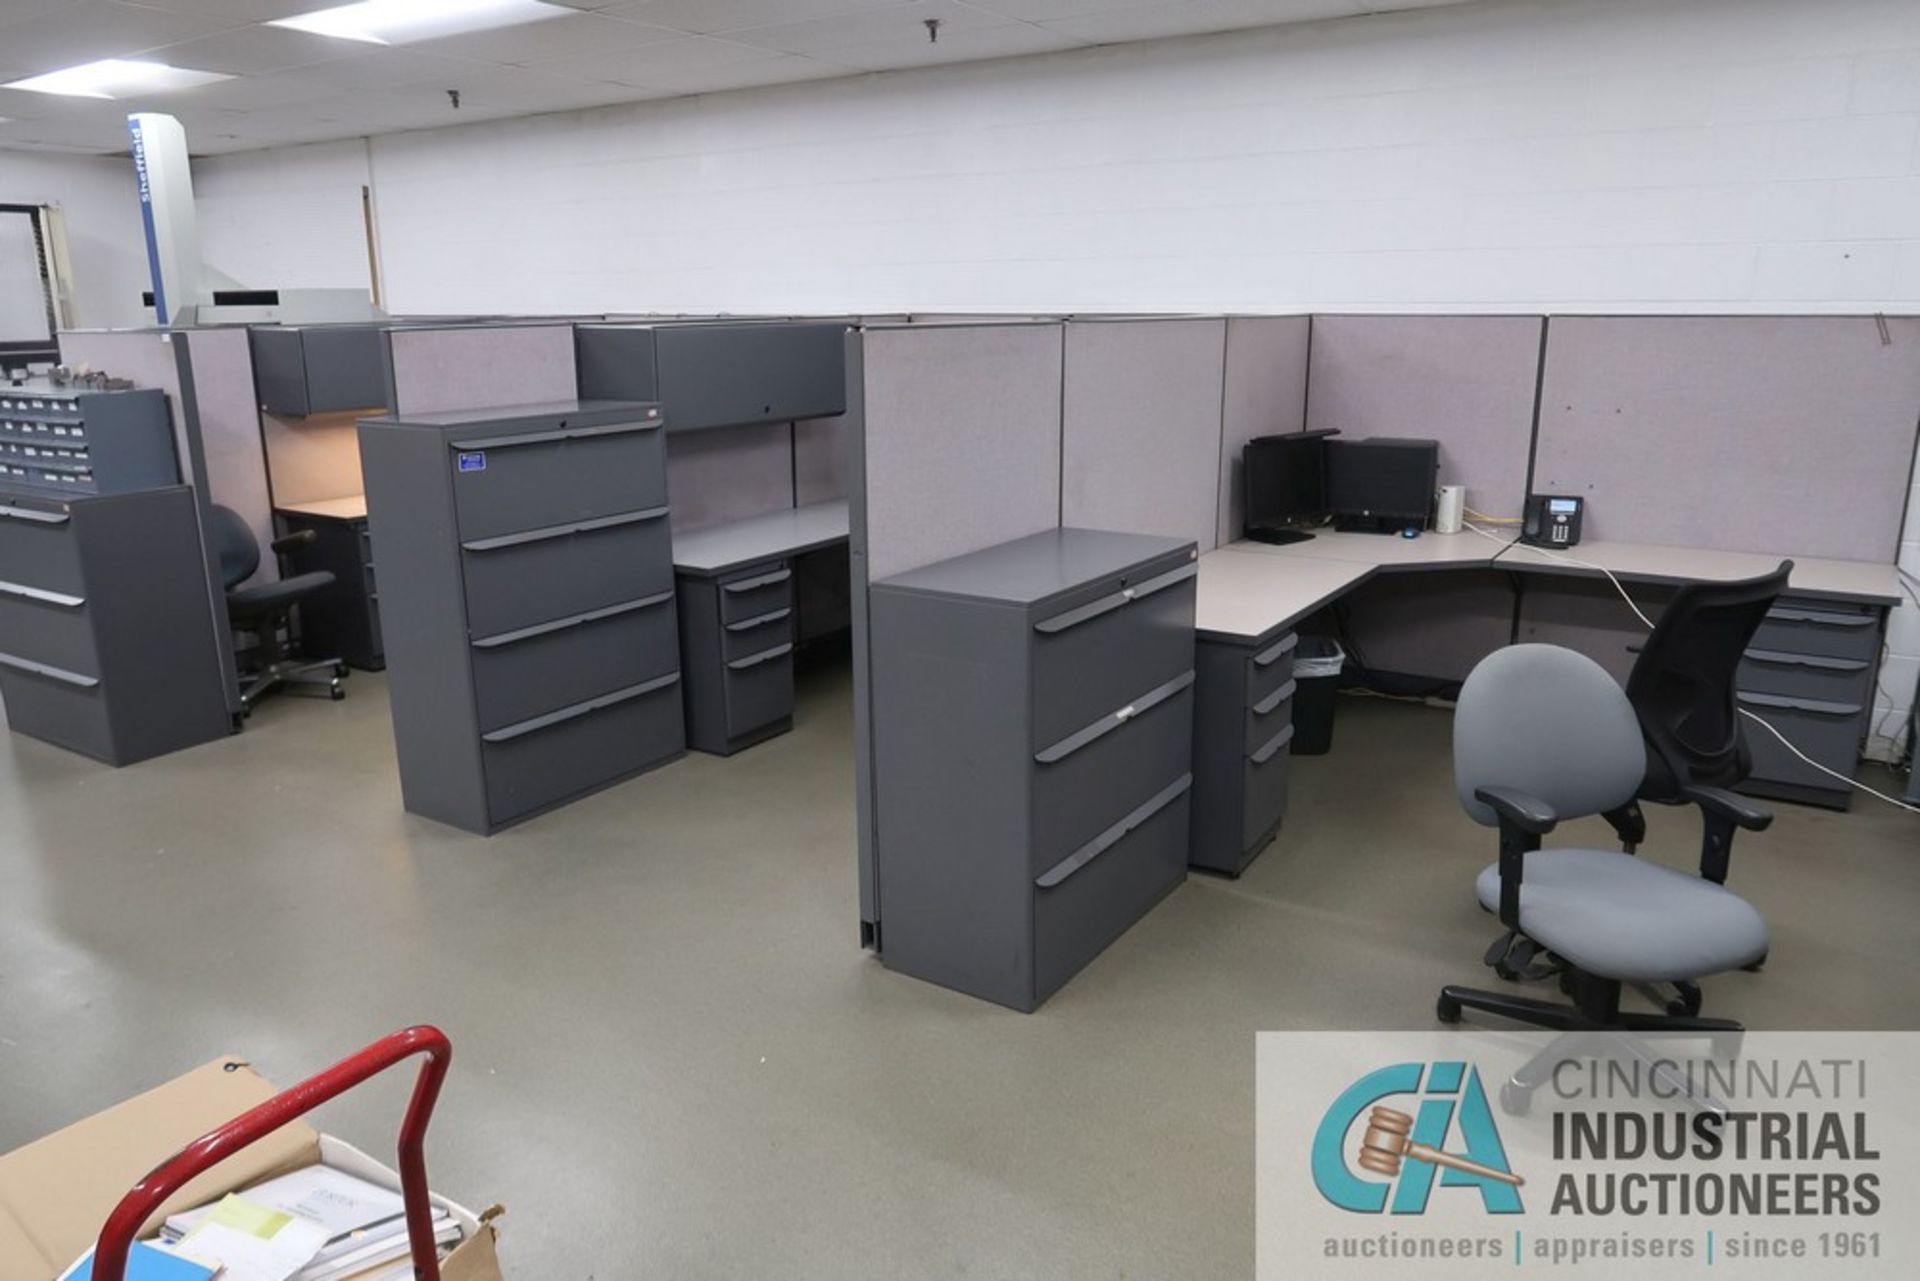 (LOT) 3-PERSON AMERICAN SEATING MODULAR OFFICE WITH L-SHAPED DESK AND OVERHEAD CABINETS, 88" X 118"